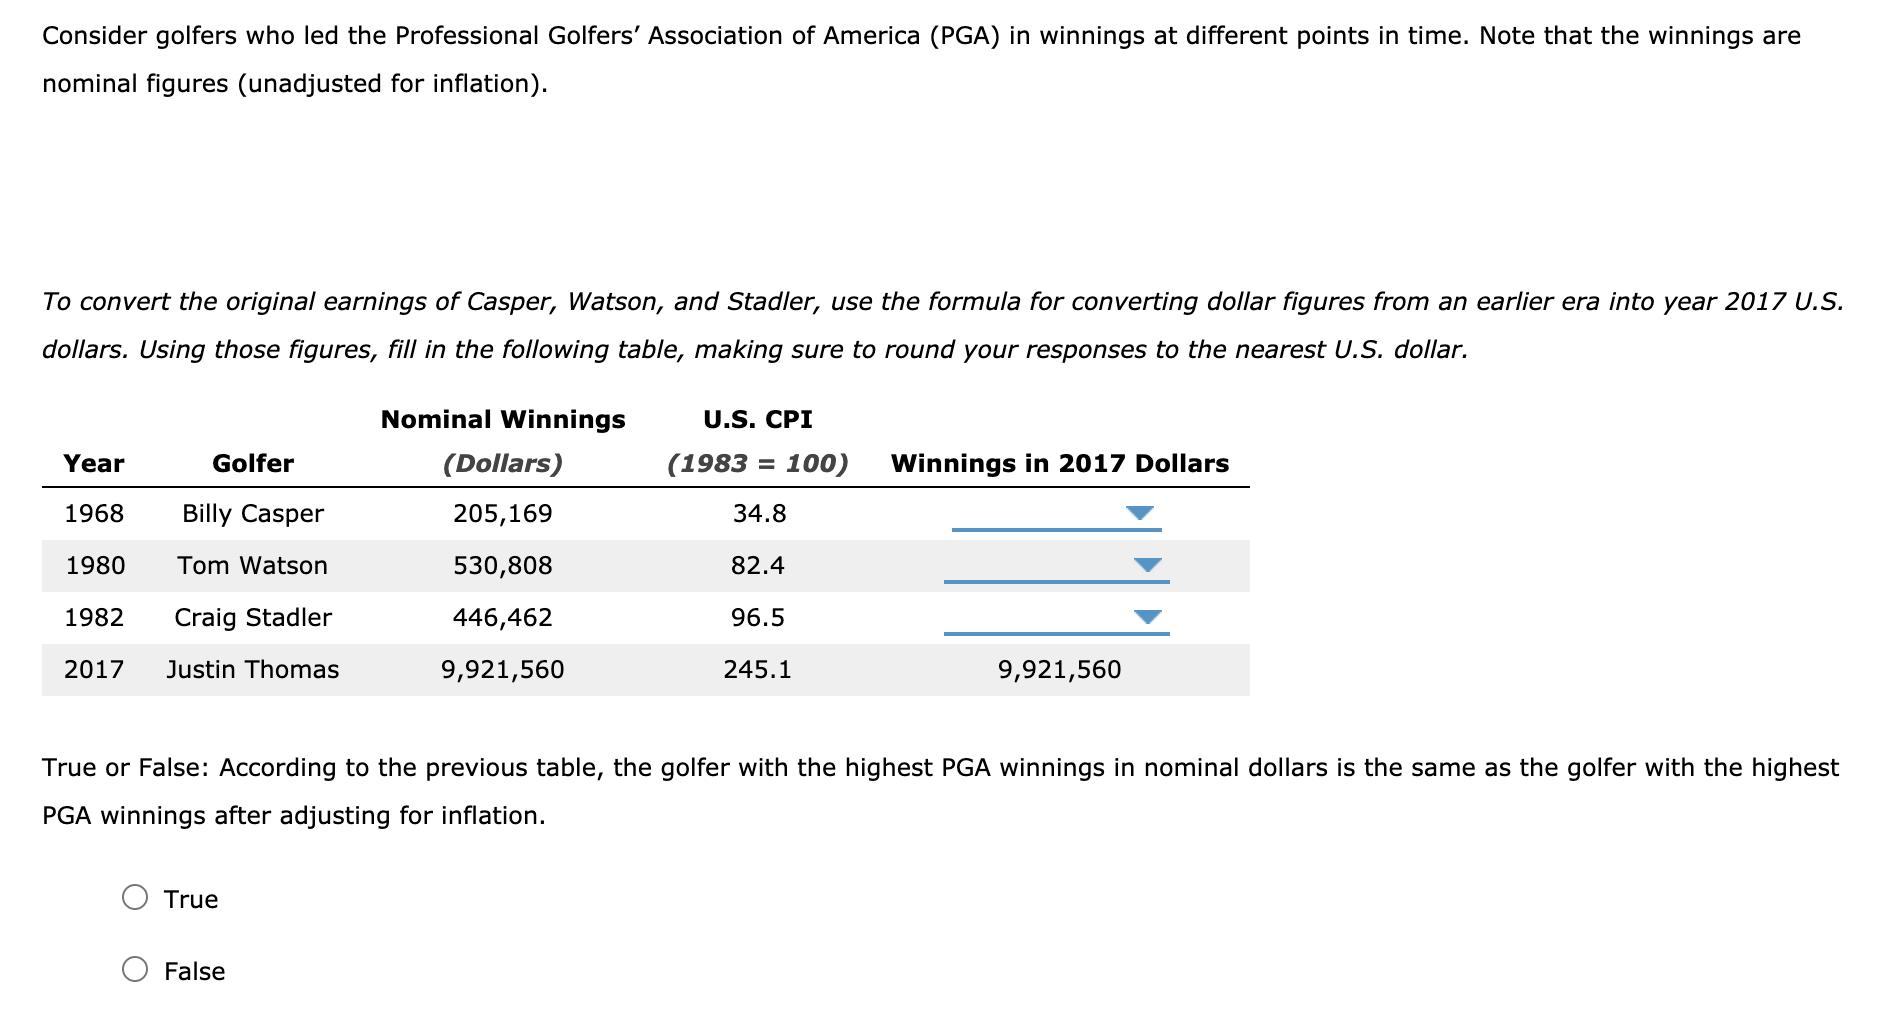 Consider golfers who led the Professional Golfers Association of America (PGA) in winnings at different points in time. Note